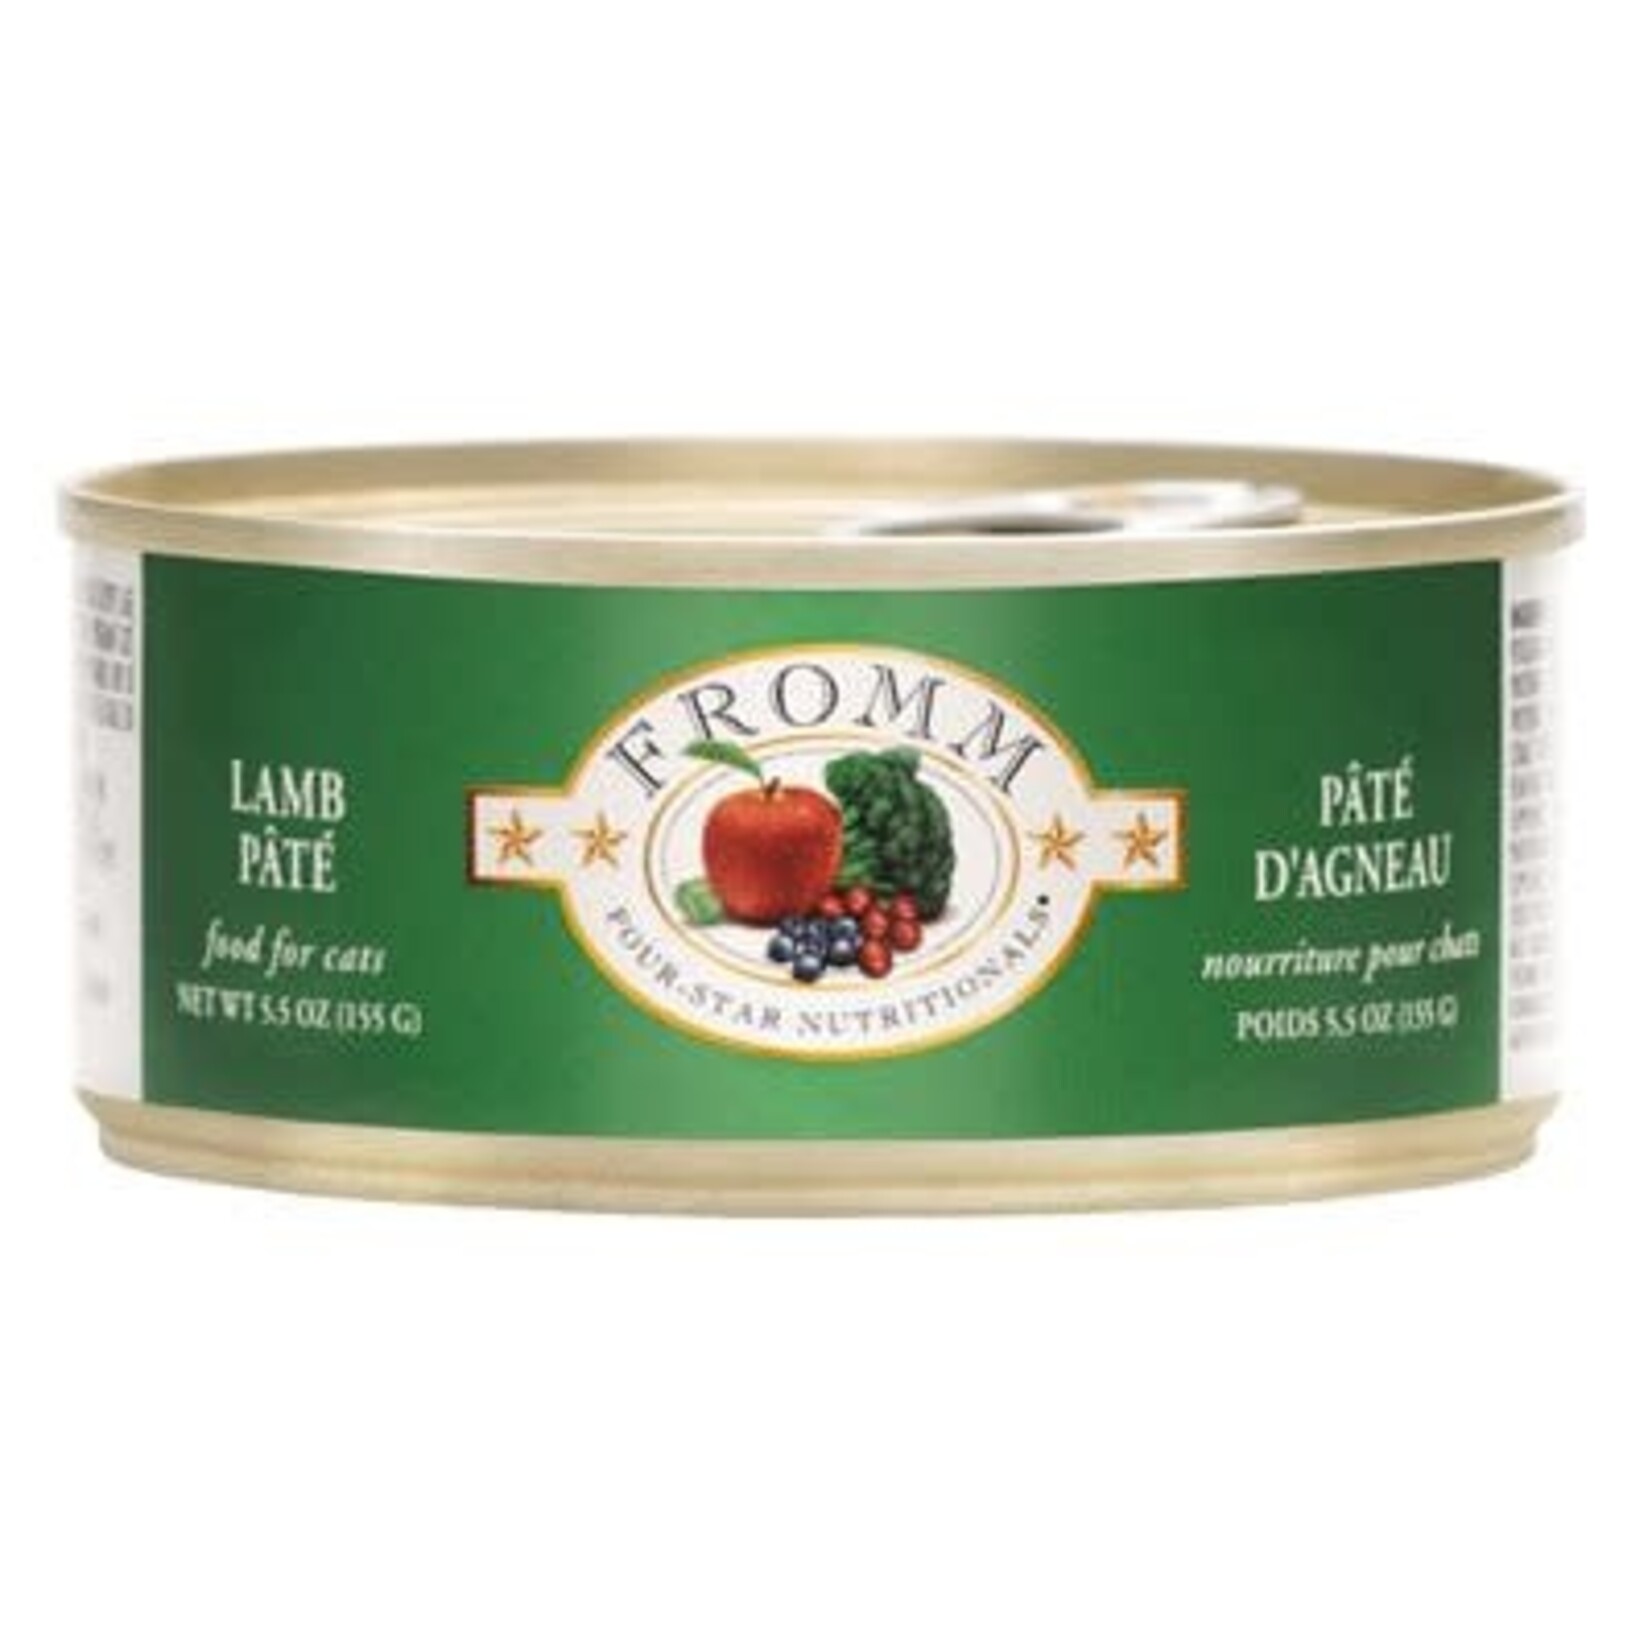 FROMM FROMM FOUR STAR NOURRITURE HUMIDE CHAT PATE D'AGNEAU 5.5 OZ